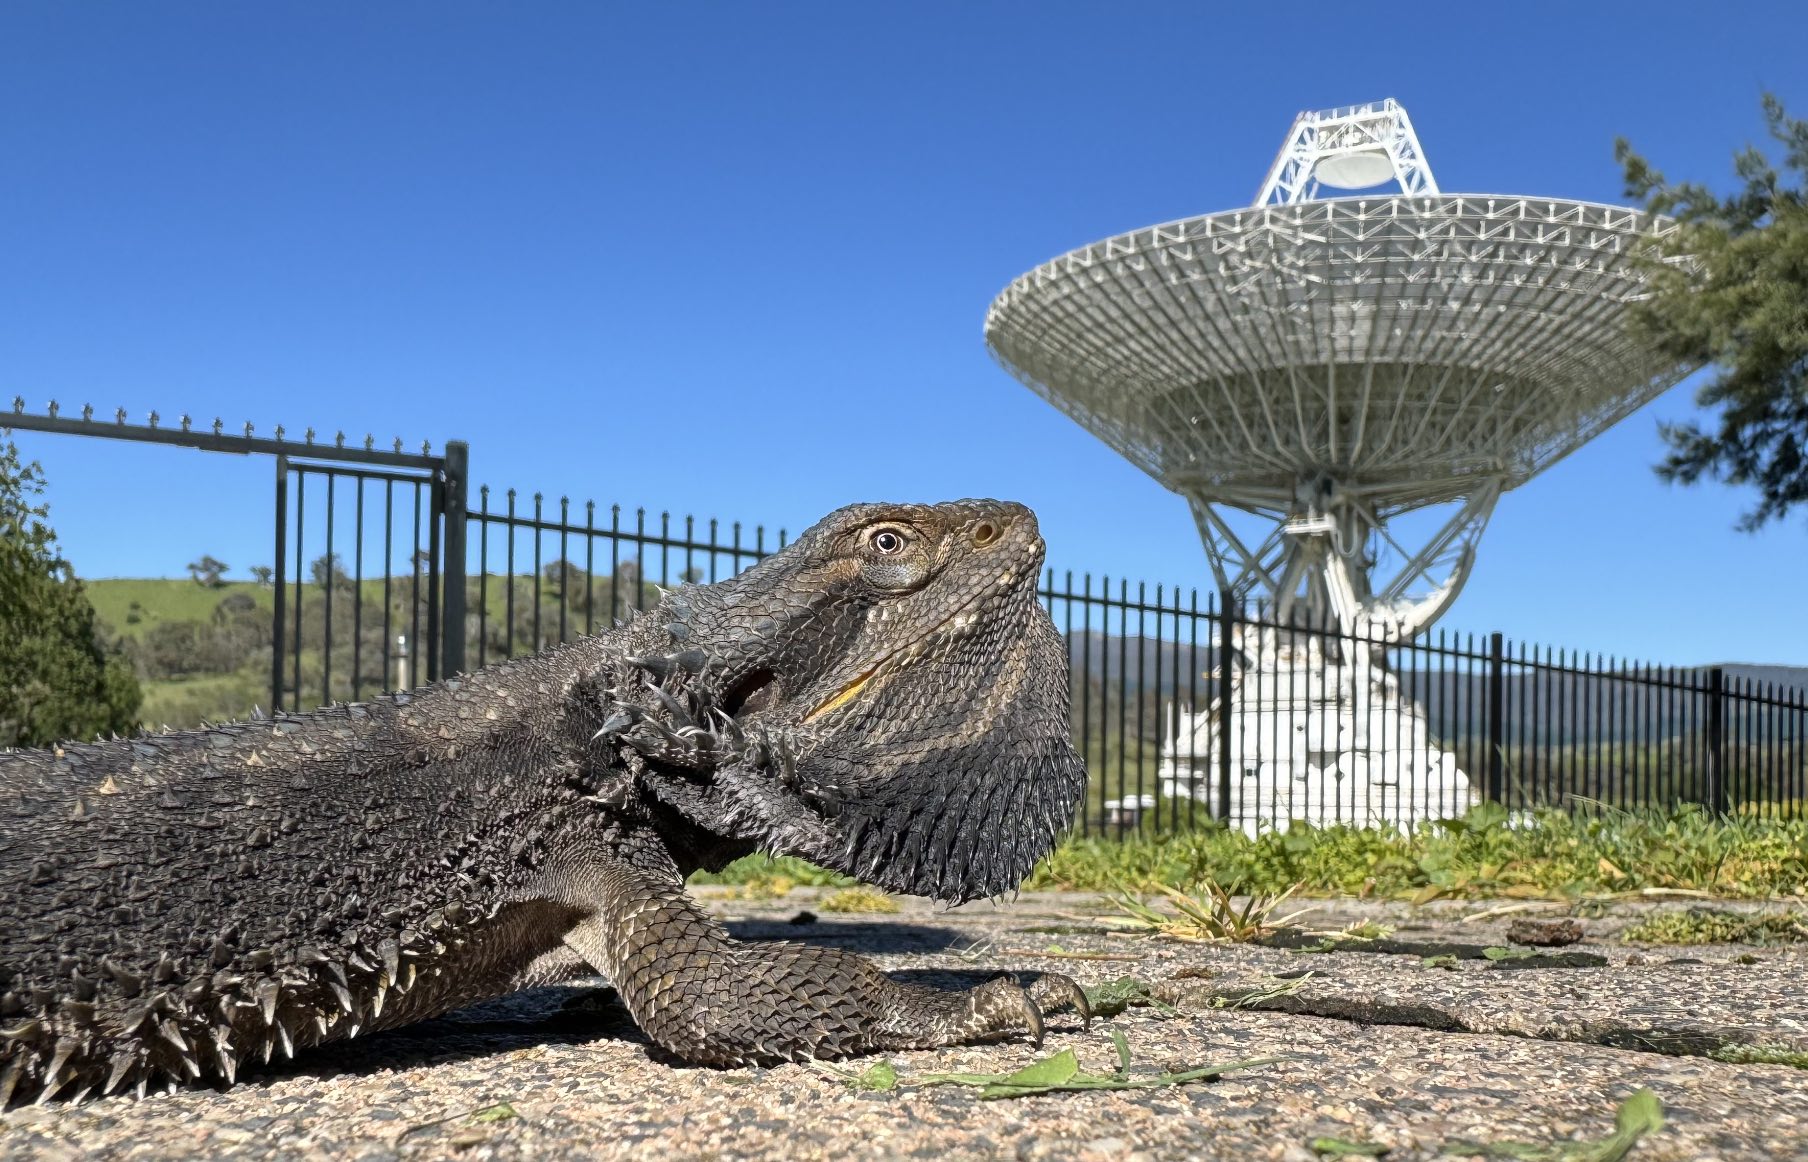 An Eastern Bearded Dragon sunning itself with the Tidbinbilla 70m antenna in the background.